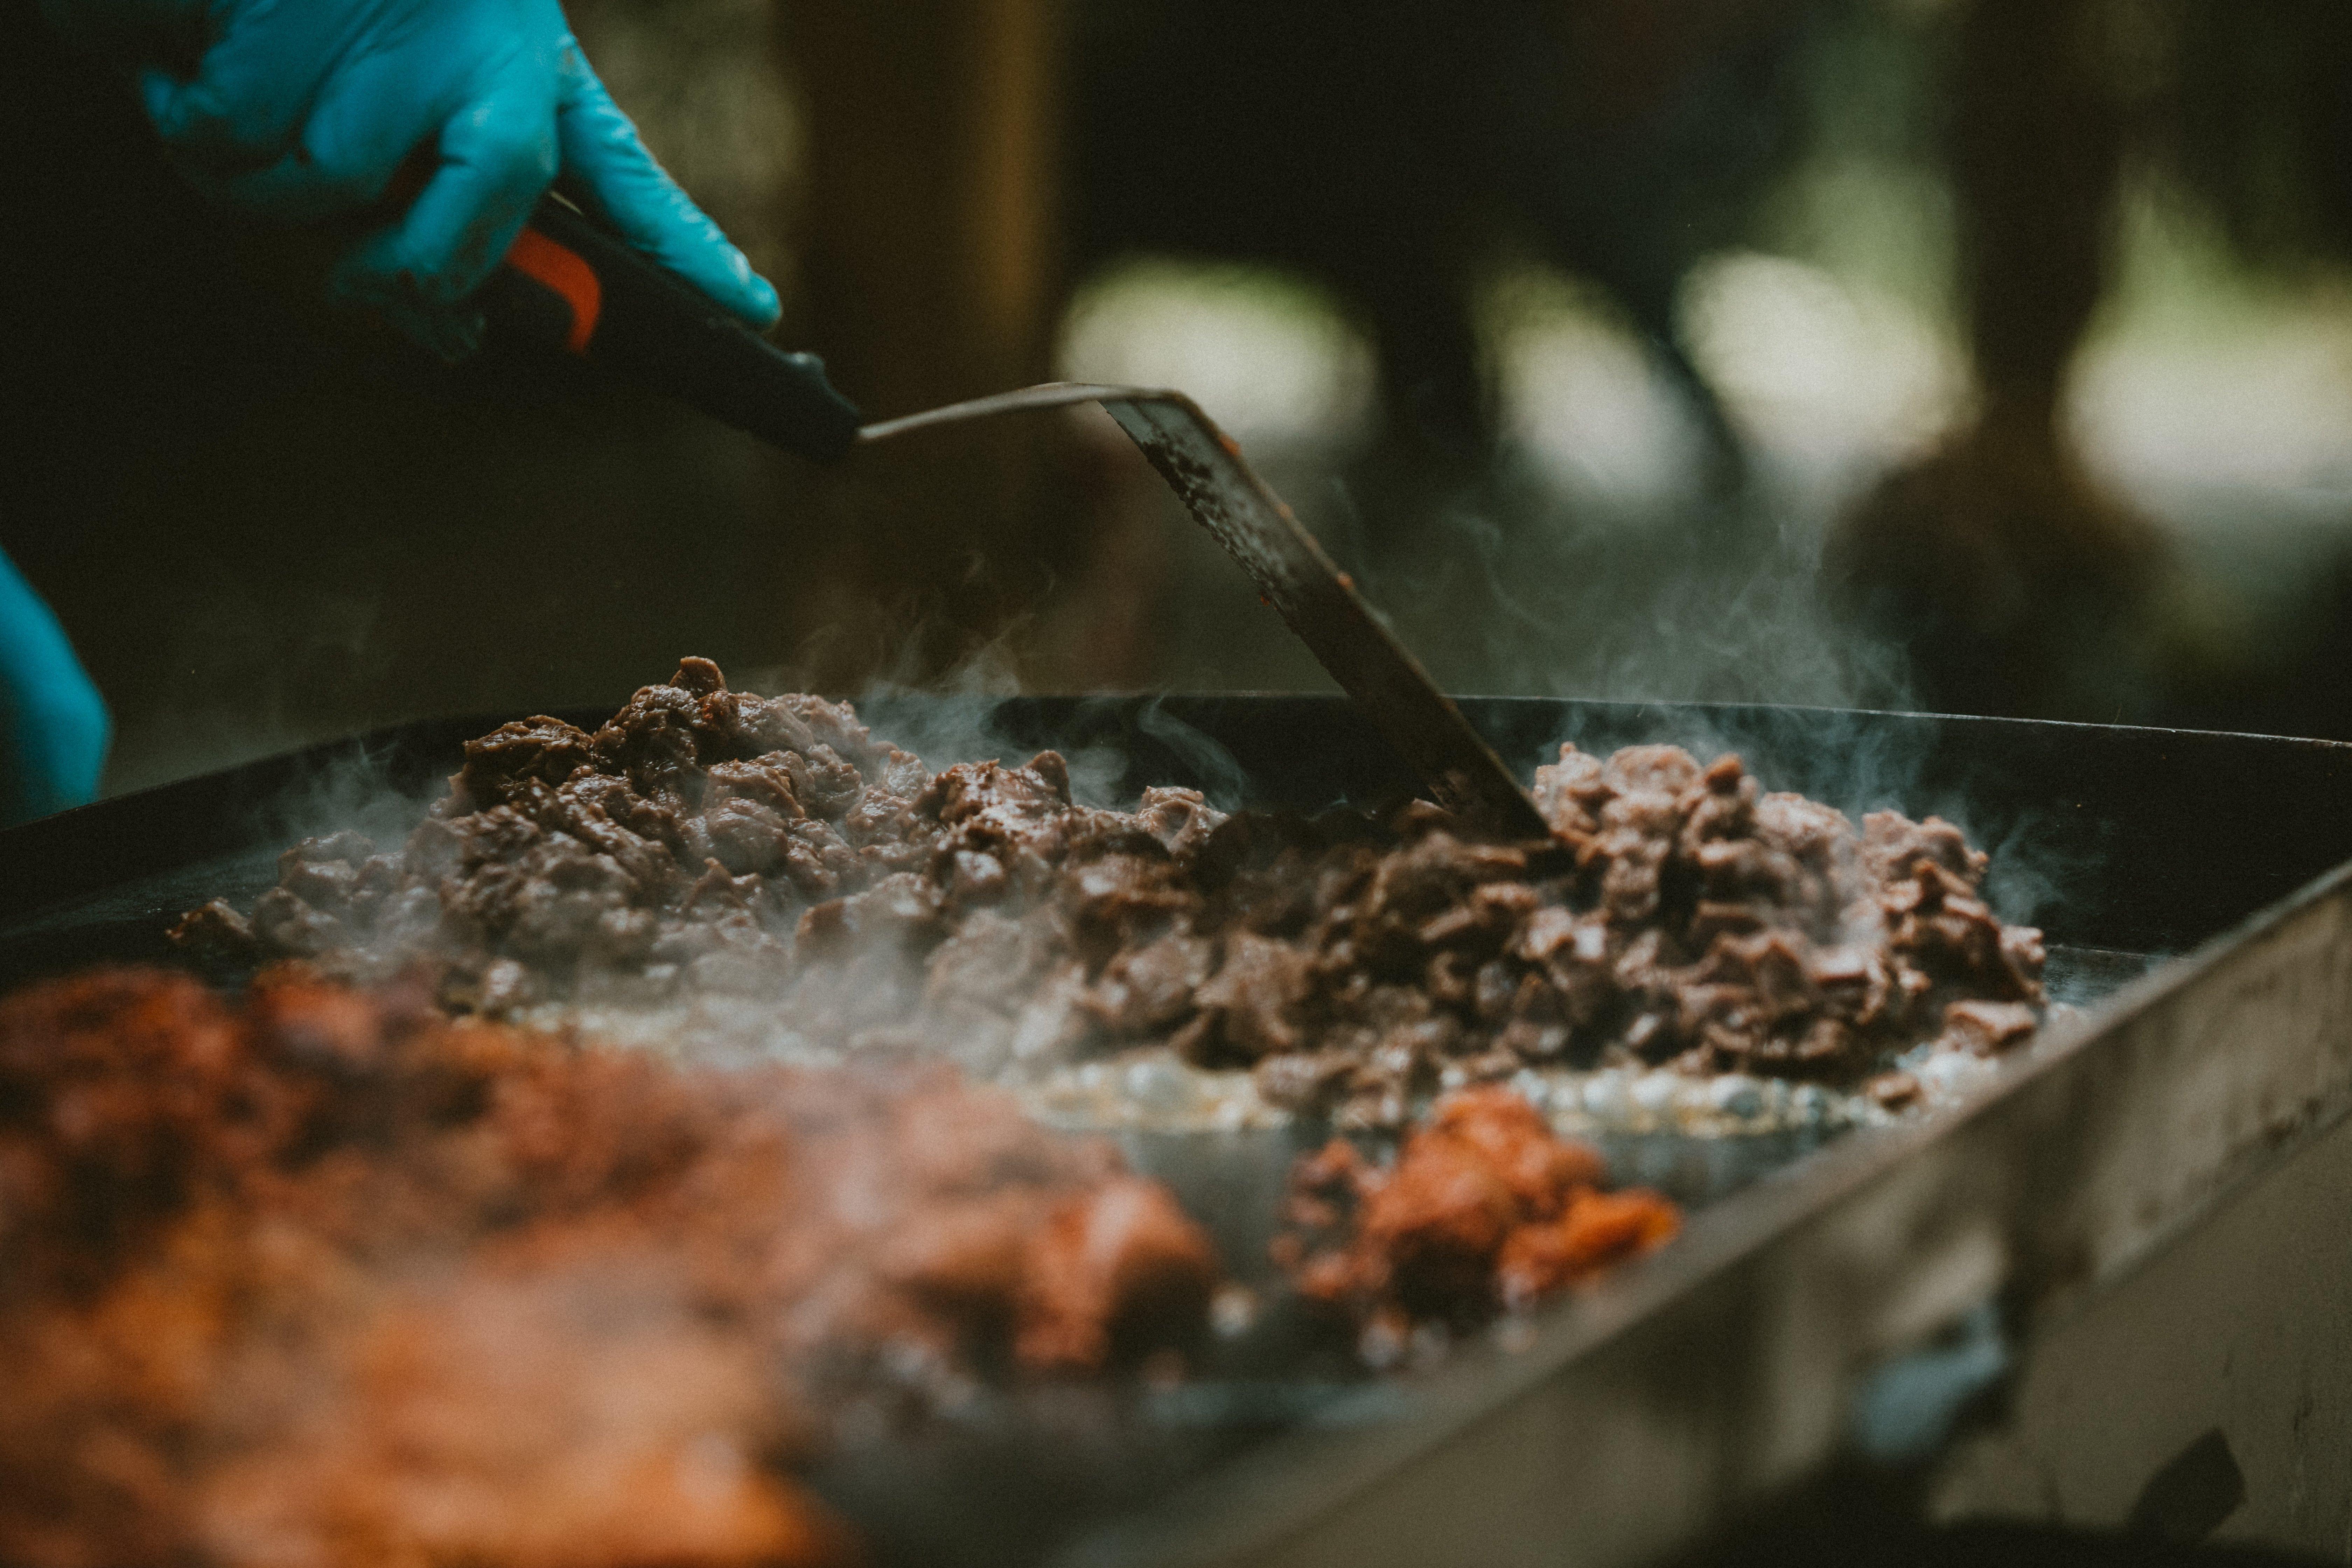 When it comes to cooking deer meat, don't overthink it. These tacos turned out great. (Realtree Image / Kerry Wix)